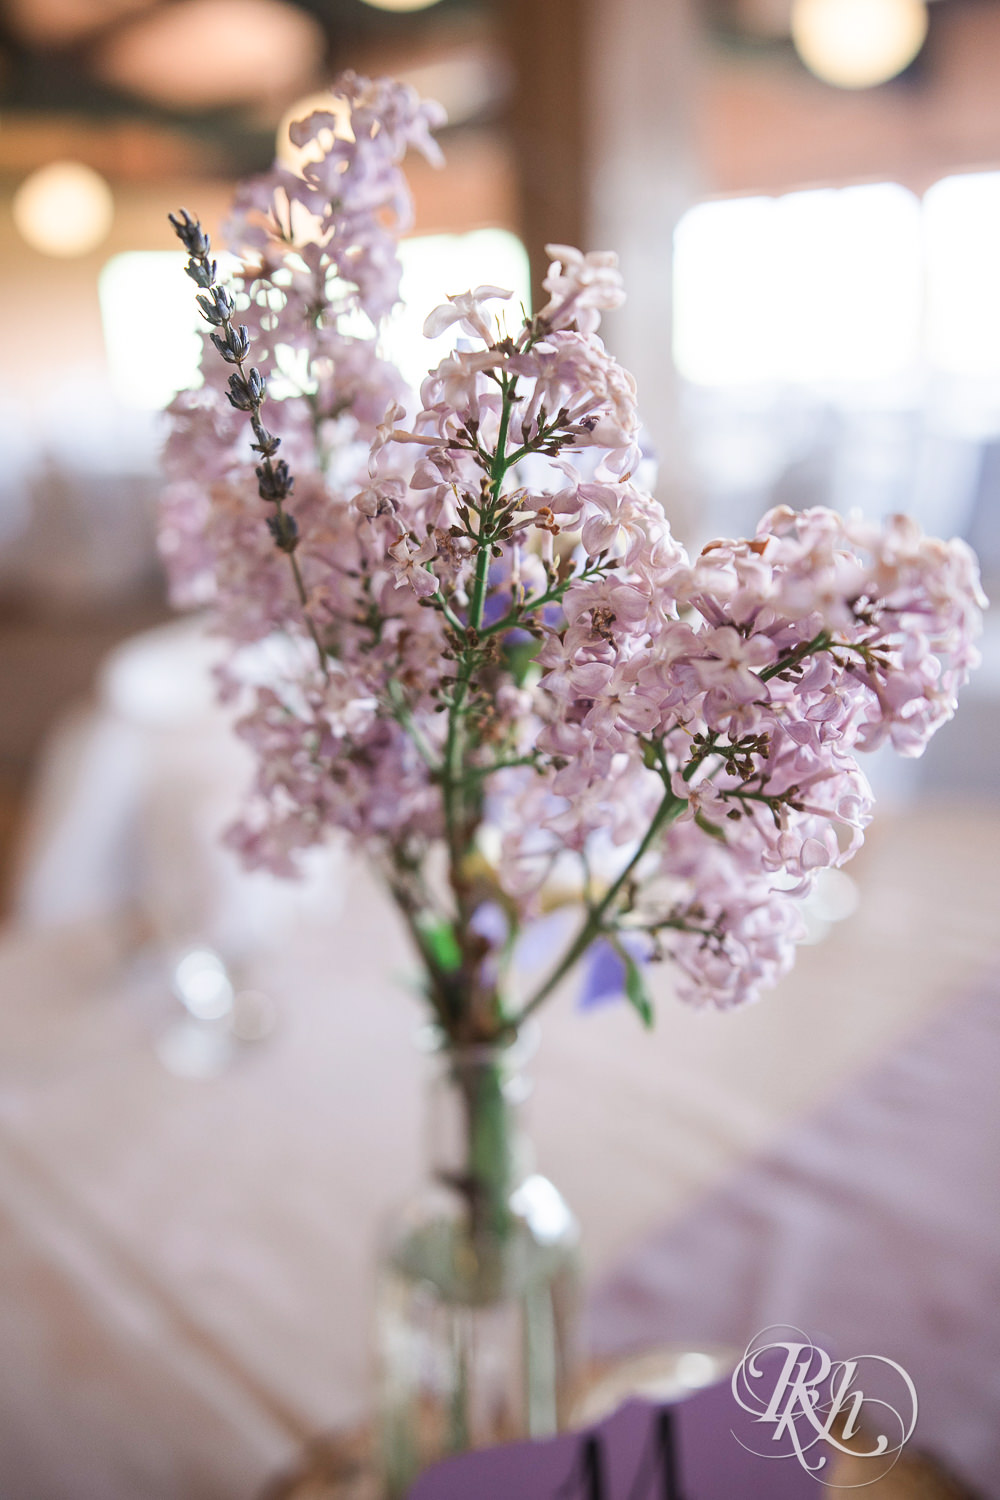 Lilacs on a table.